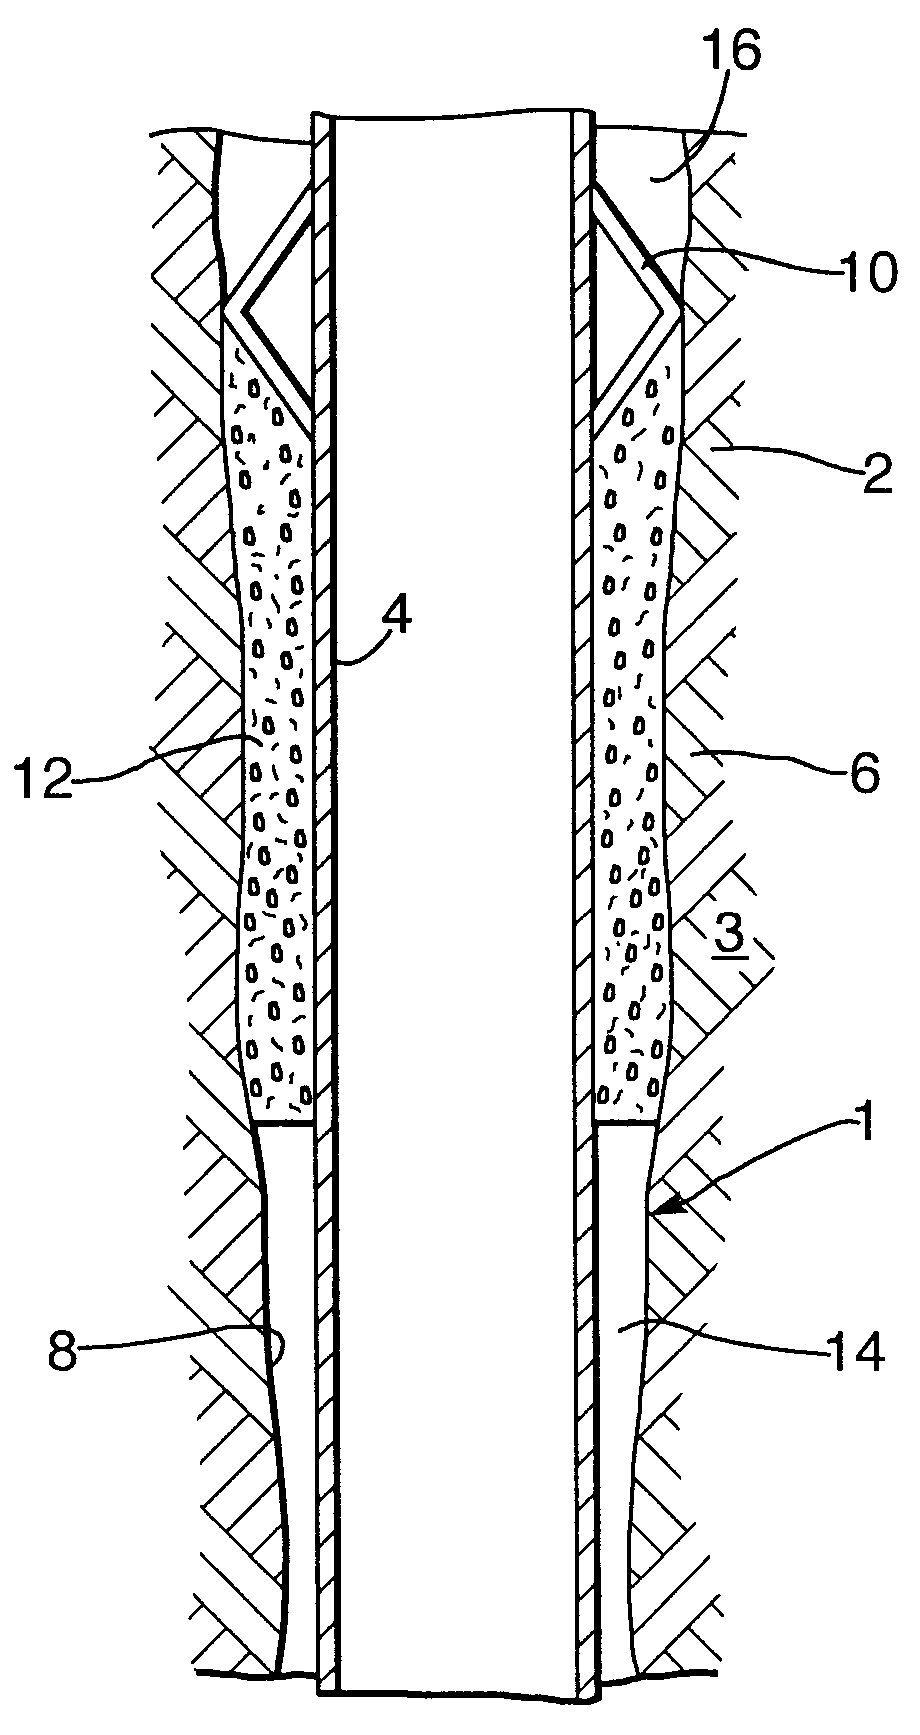 Method of sealing an annular space in a wellbore